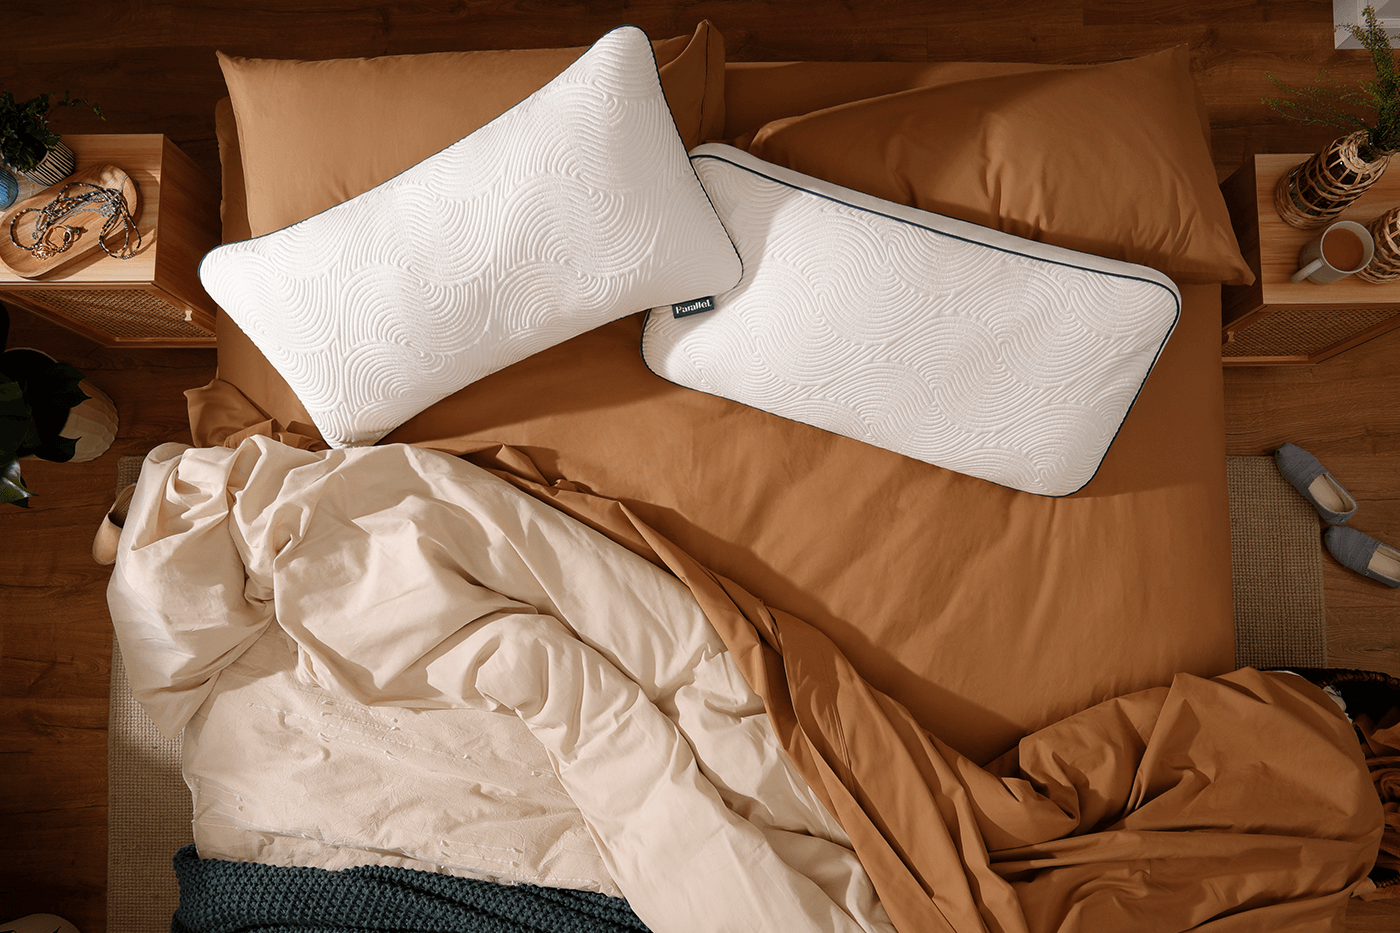 Why We Made the Parallel Pillow